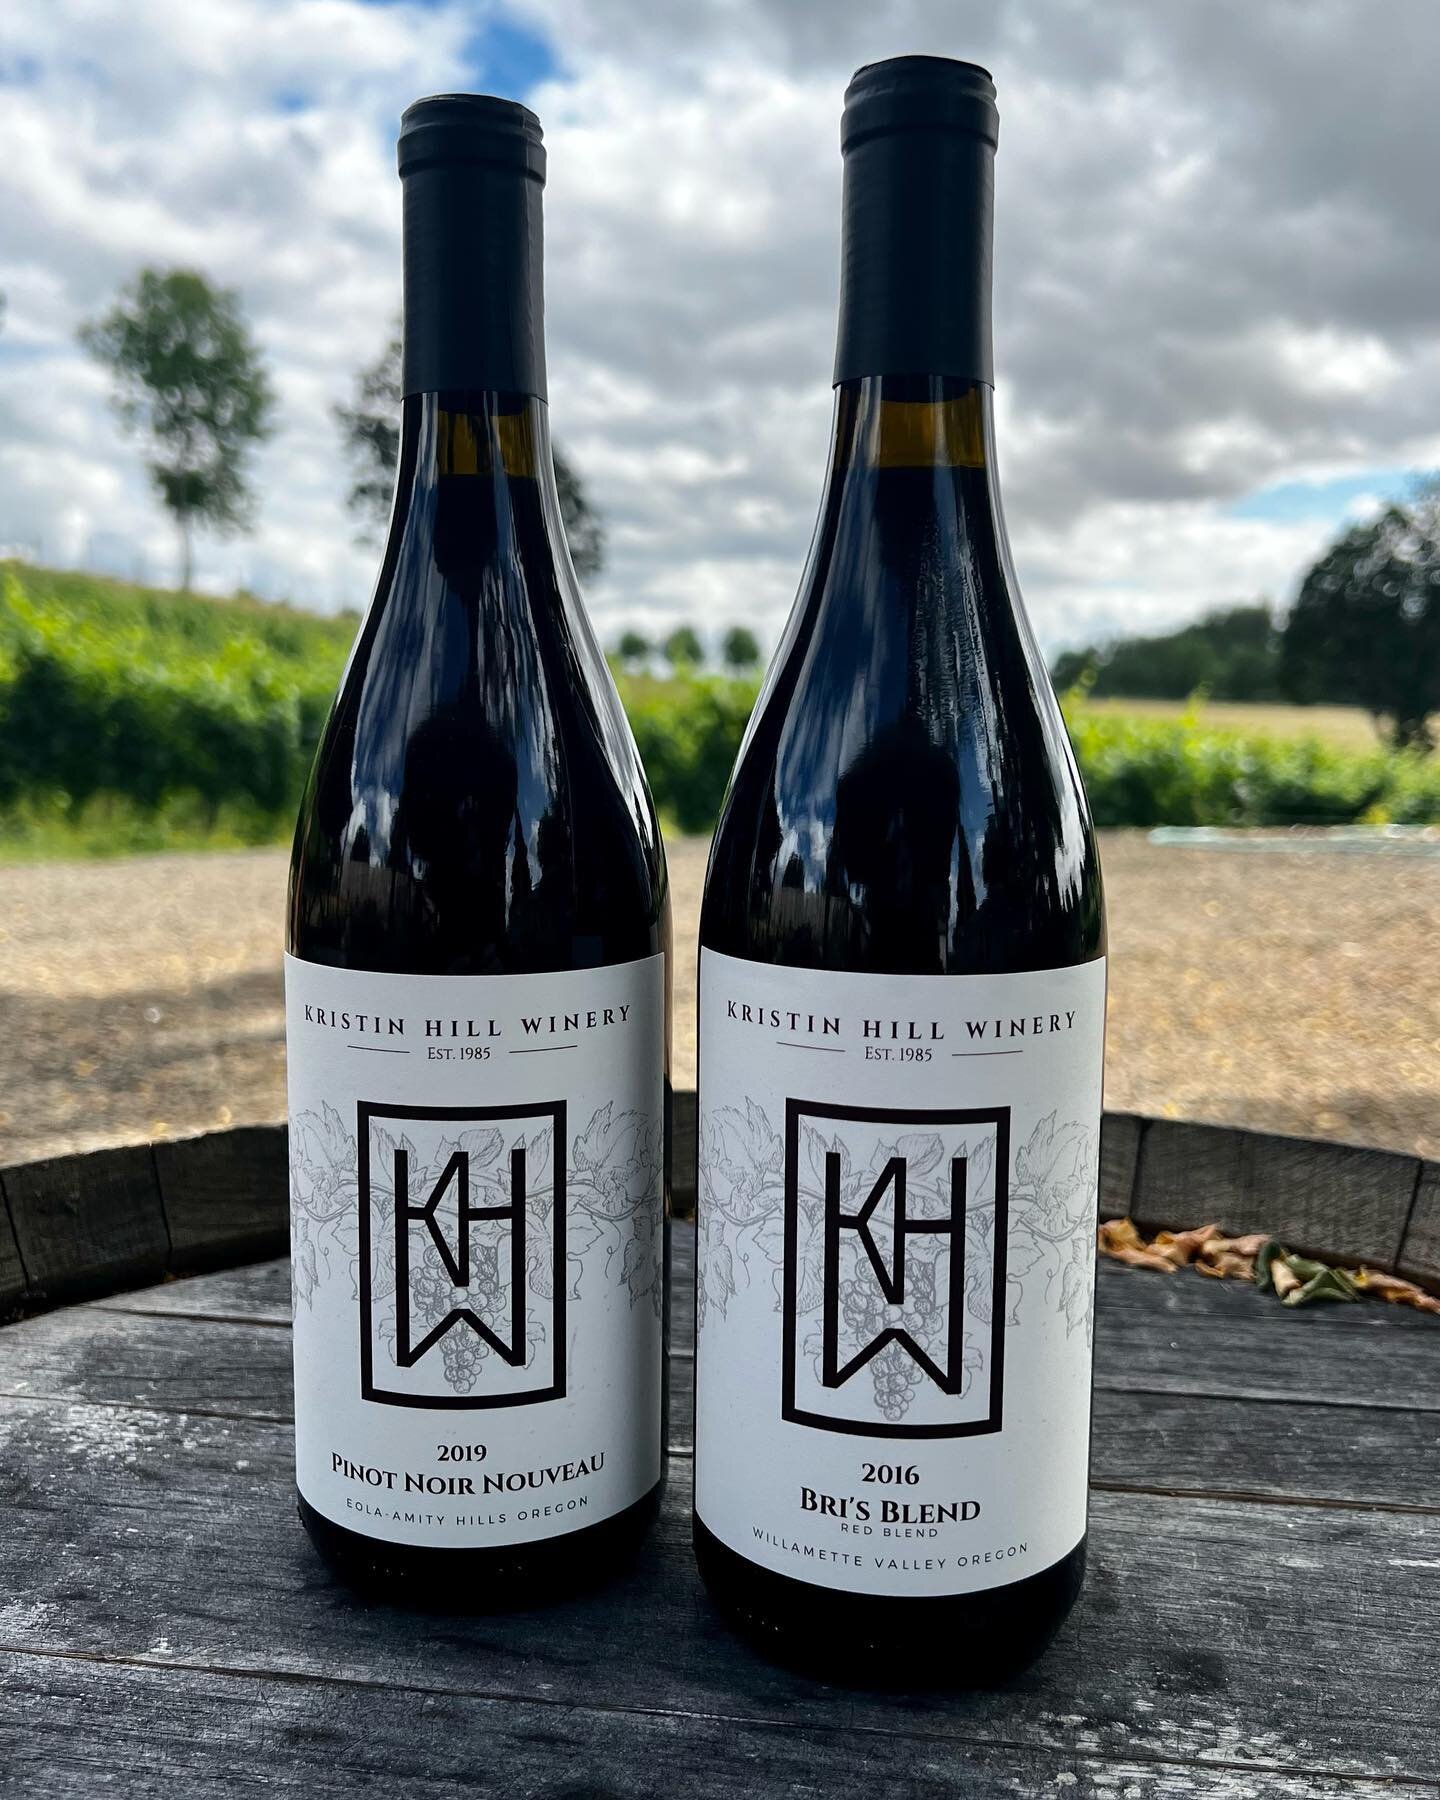 Happy #InternationalPinotNoirDay! 

Whether you&rsquo;re planning on having two glasses or two bottles tonight, we support your decision. 

𝑲𝒓𝒊𝒔𝒕𝒊𝒏 𝑯𝒊𝒍𝒍 𝑾𝒊𝒏𝒆𝒓𝒚
#pinotnoir #summersips #pinotnoirday #twobottles #twoglasses #enjoyeverys